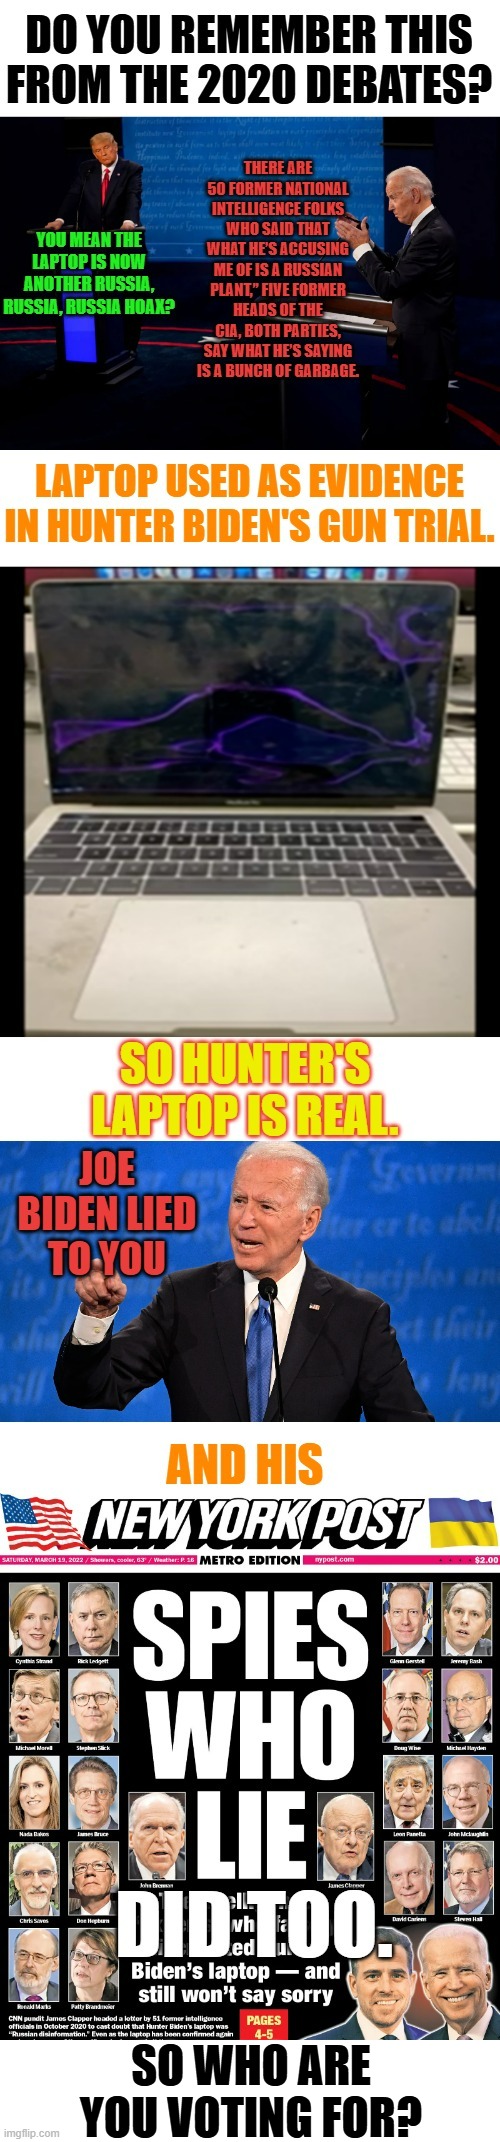 So Who Are You Voting For? | SO WHO ARE YOU VOTING FOR? | image tagged in memes,joe biden,lies,laptop,your,vote | made w/ Imgflip meme maker